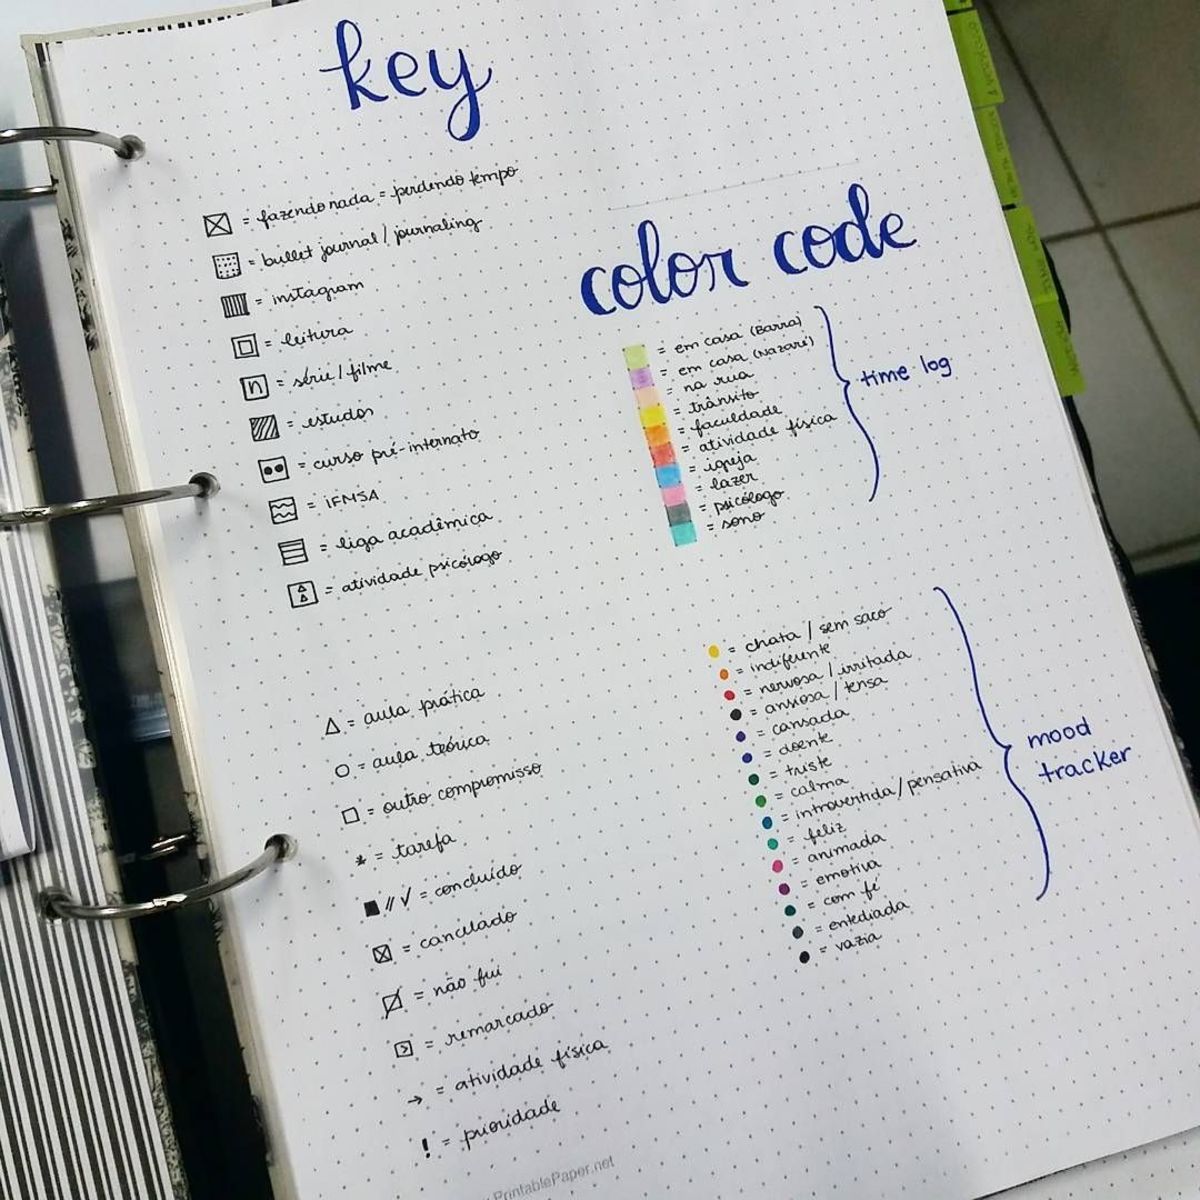 The key page shows the symbols you use in your bullet journal